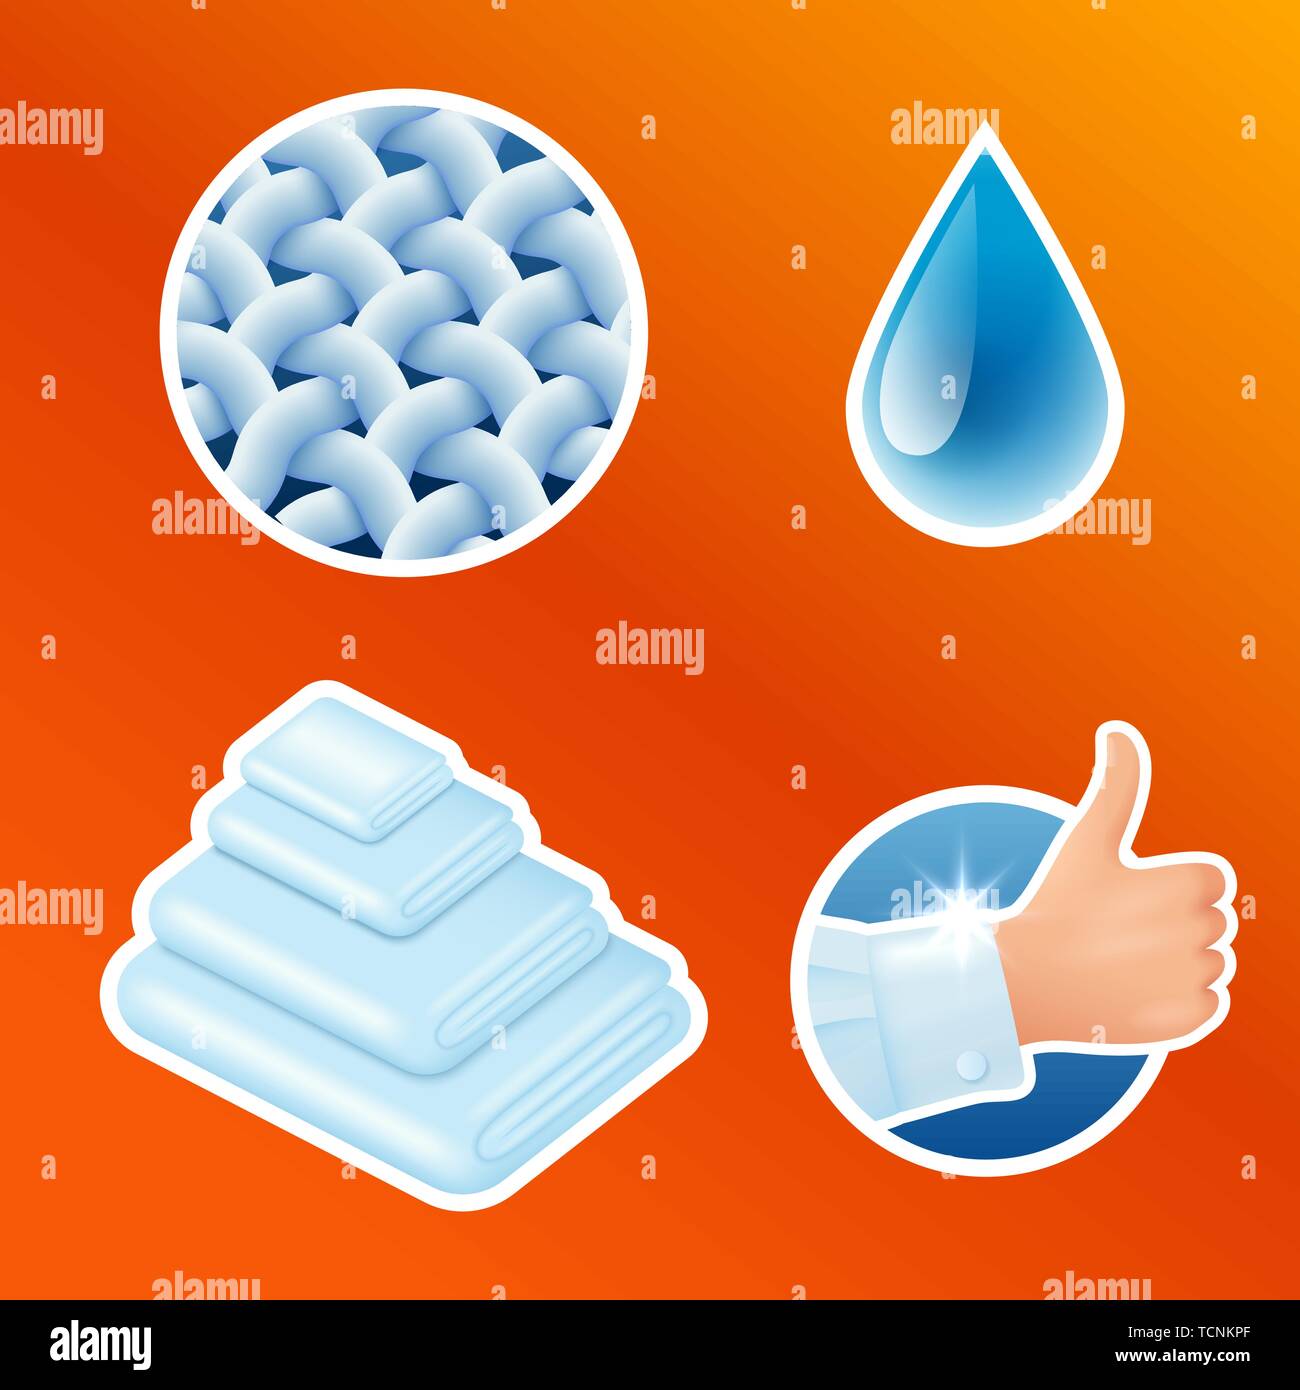 Washing clothes stickers set, clean laundry, fibers, water drop, thumbs up icons isolated, vector illustration. Stock Vector